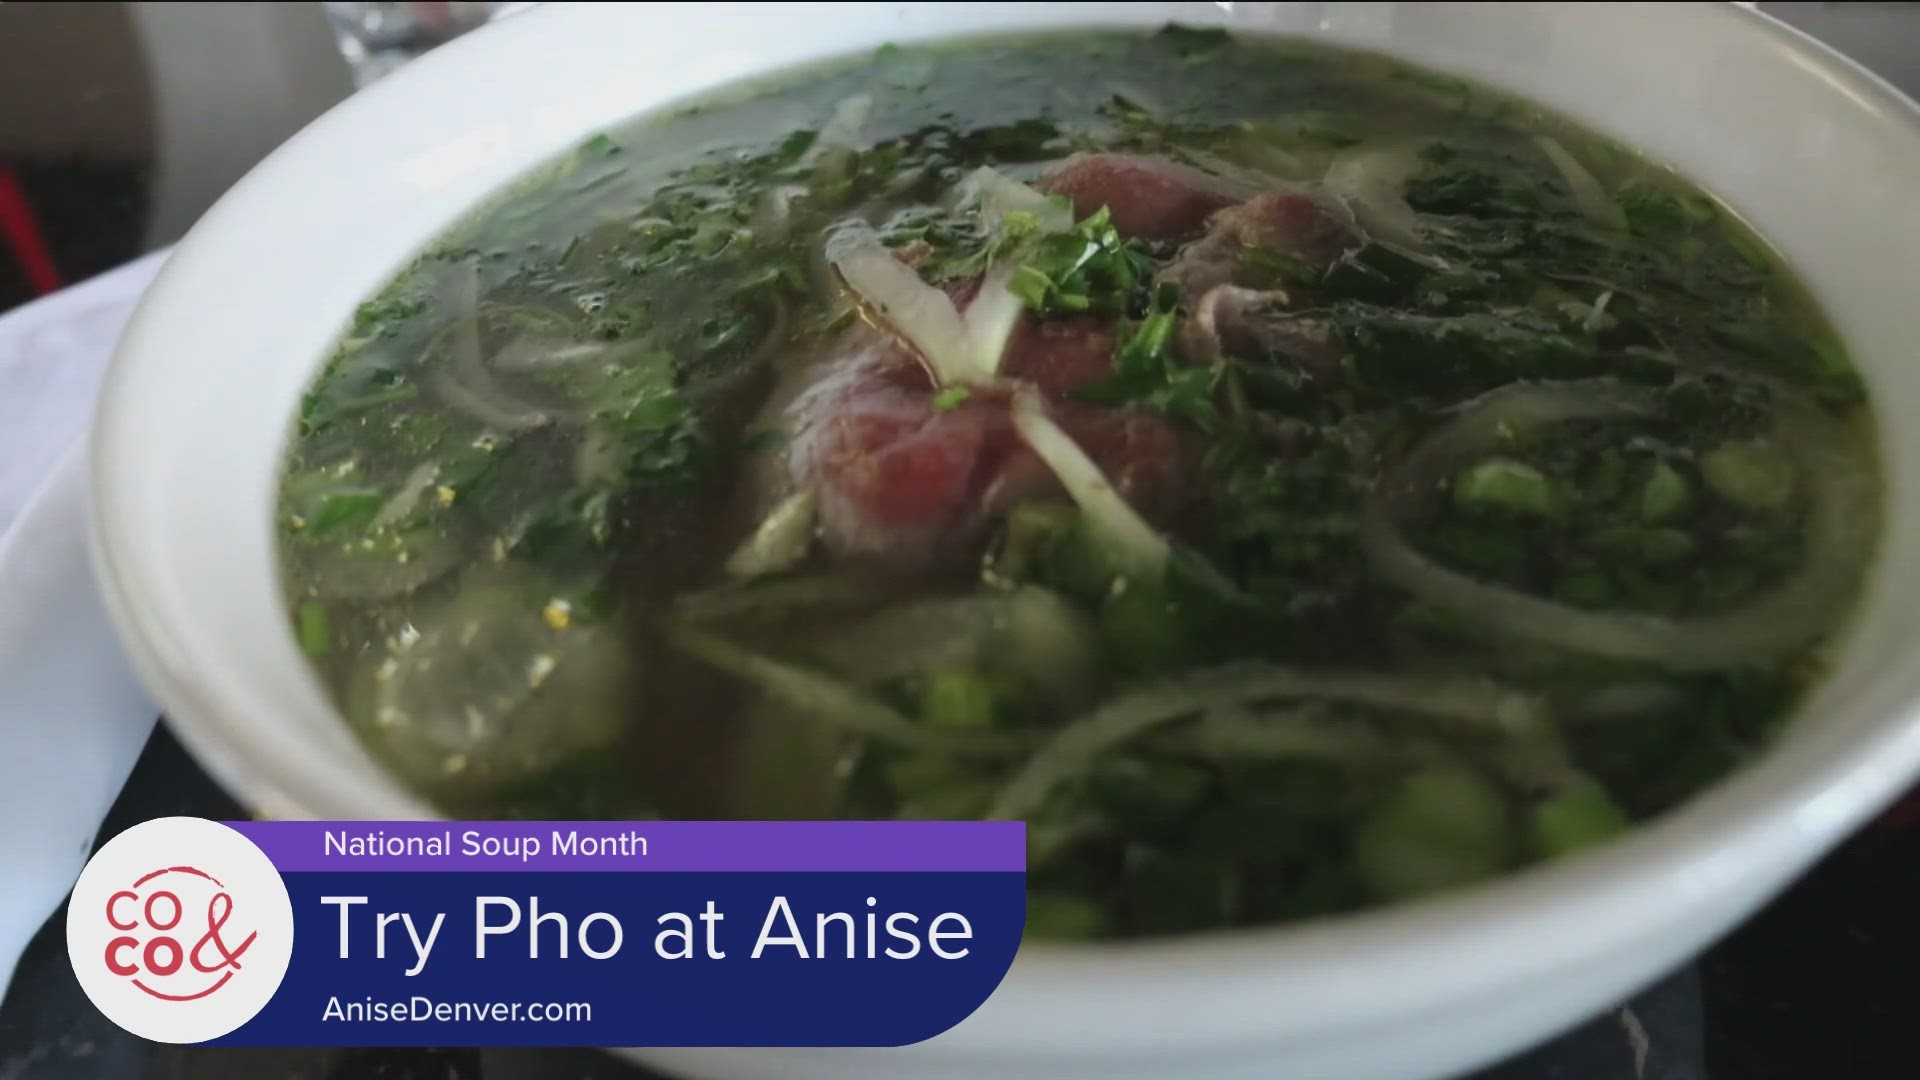 Go get some hot delicious pho at Anise Modern Vietnamese Eatery. Find the full menu at AniseDenver.com.